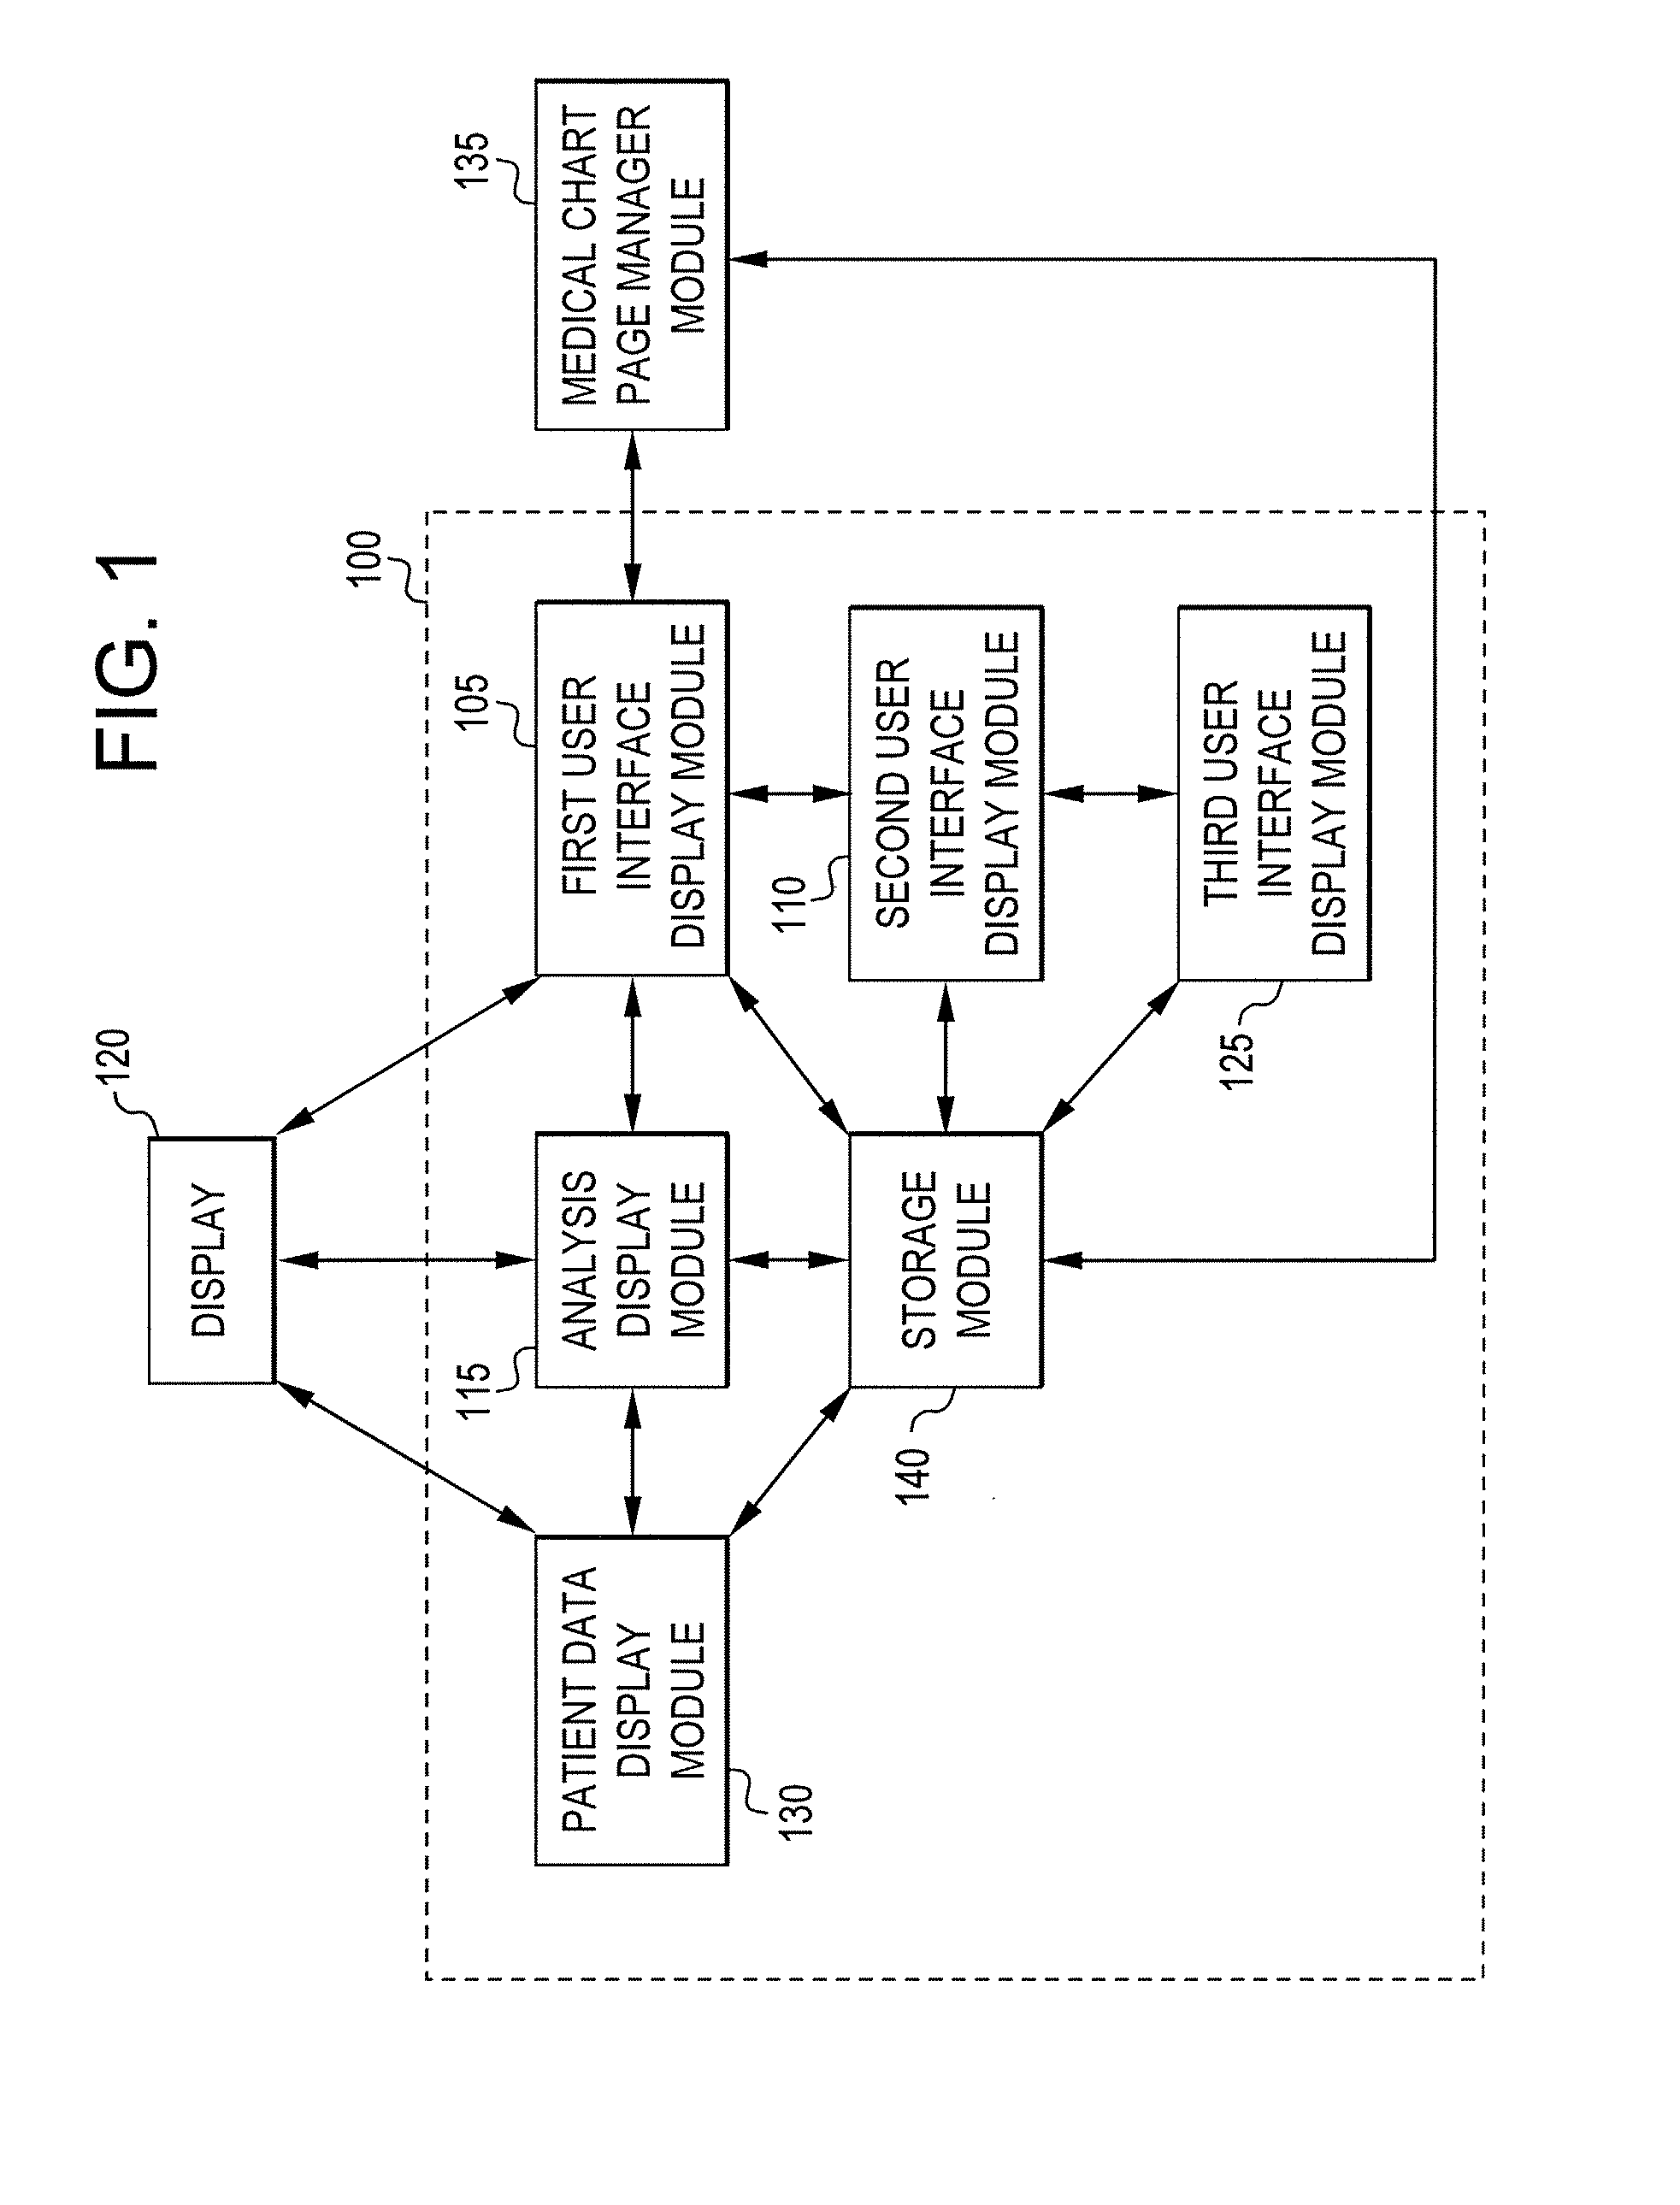 Medical data acquisition and patient management system and method